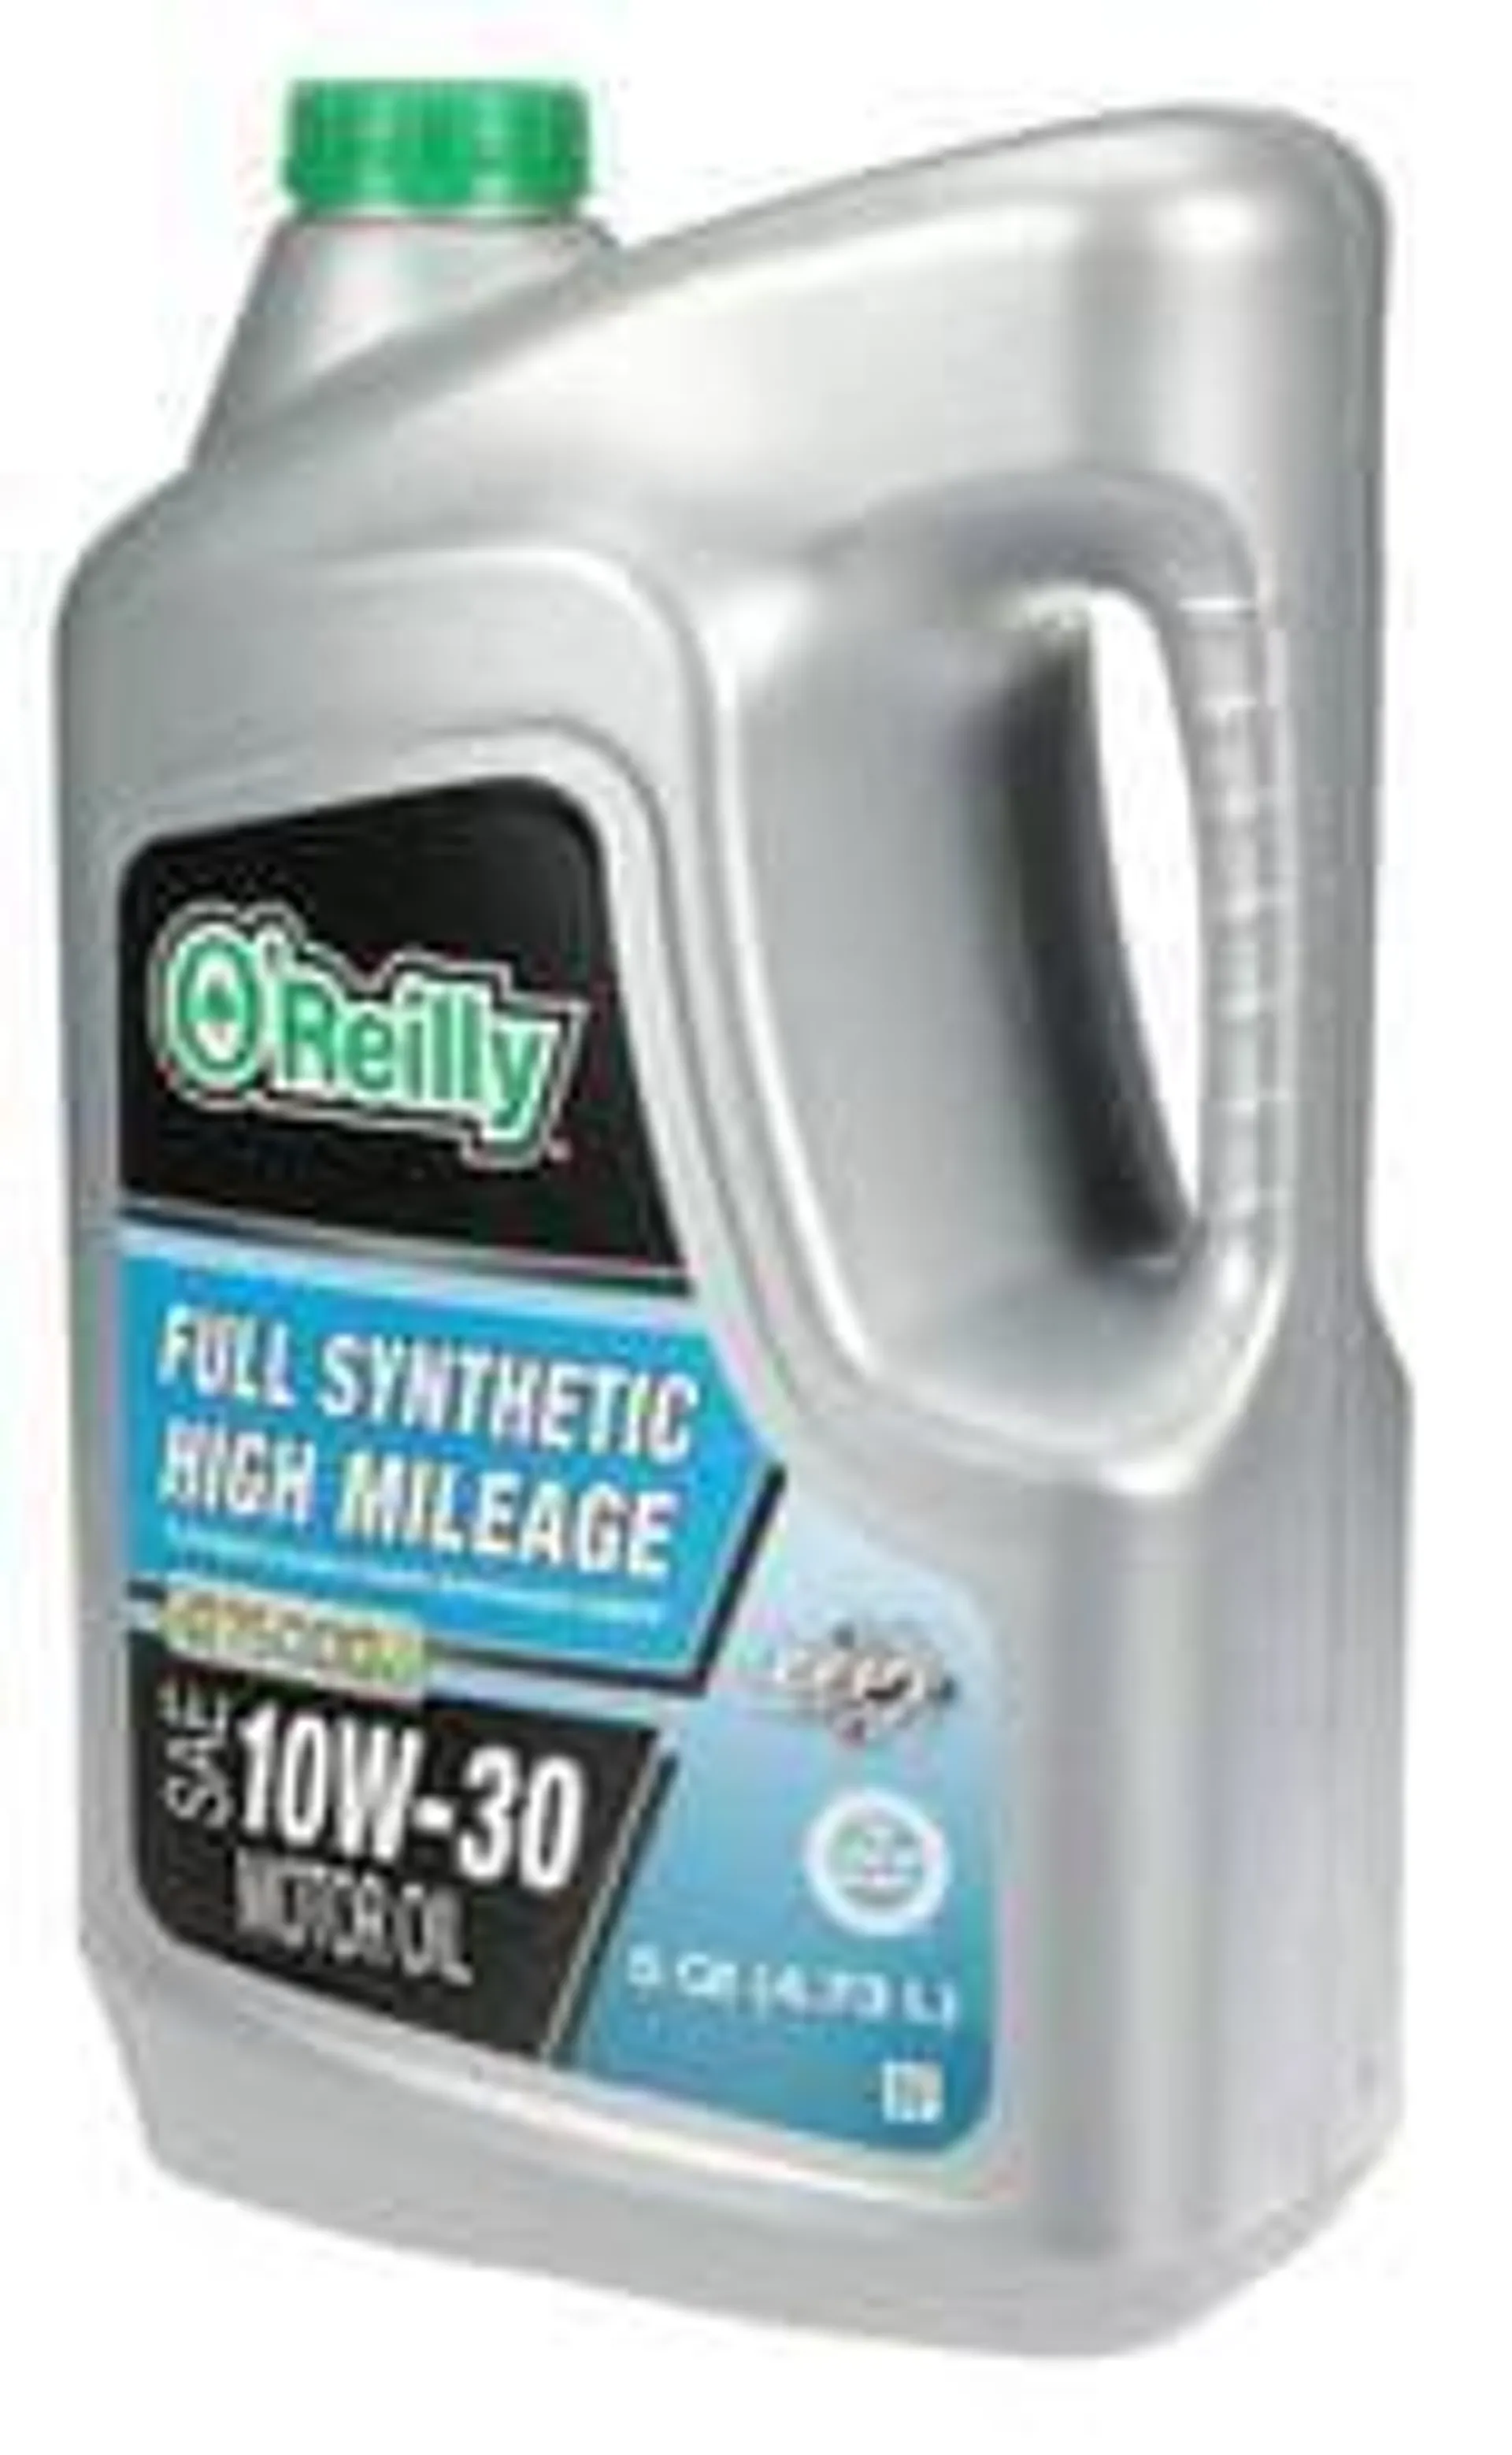 O'Reilly Full Synthetic Full Synthetic High Mileage Motor Oil 10W-30 5 Quart - HISYN10-30-5QT